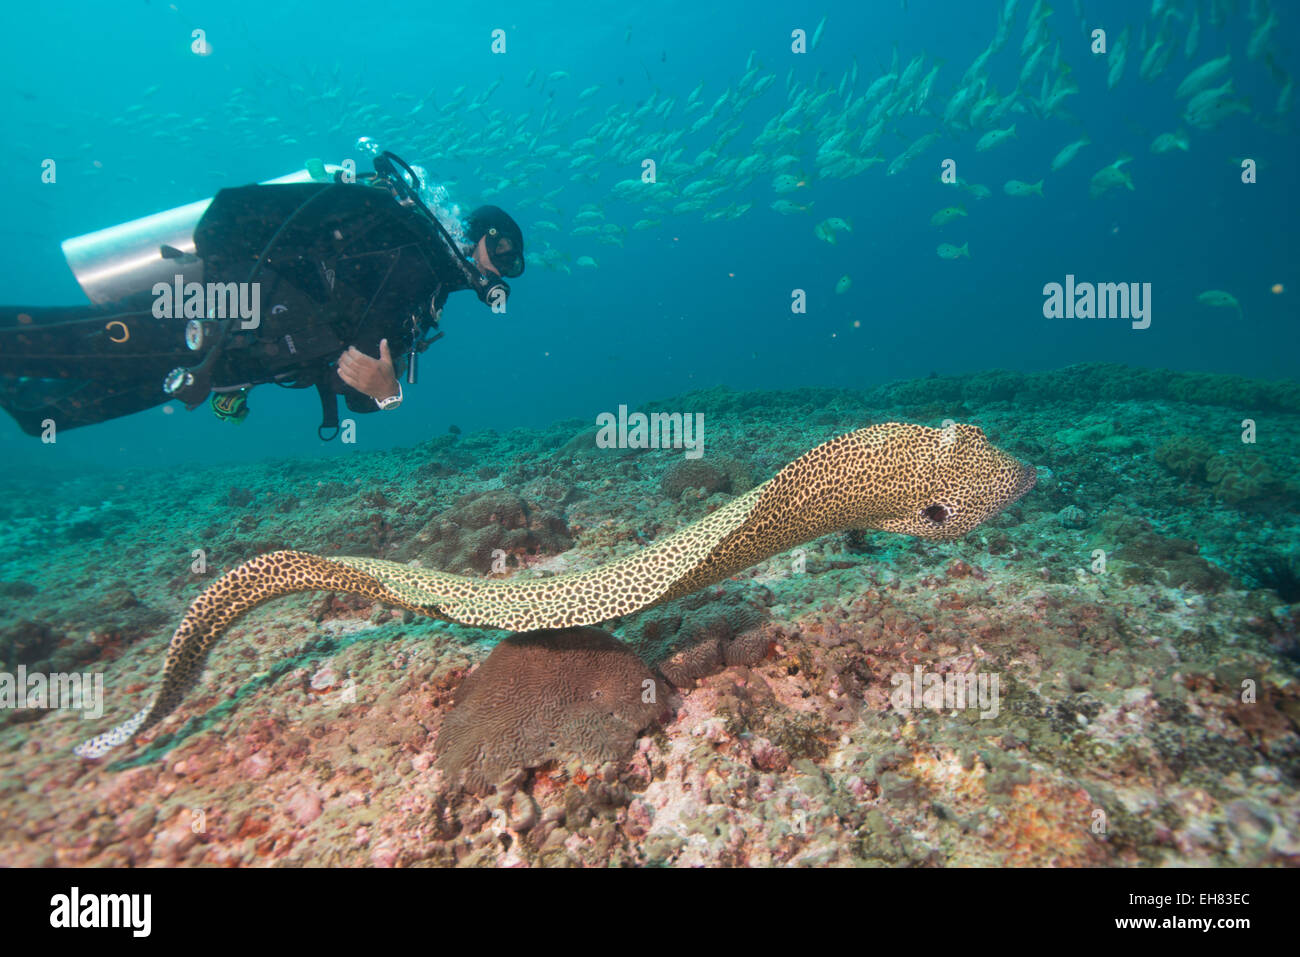 Free spotted eel, Dimaniyat Islands, Gulf of Oman, Oman, Middle East Stock Photo